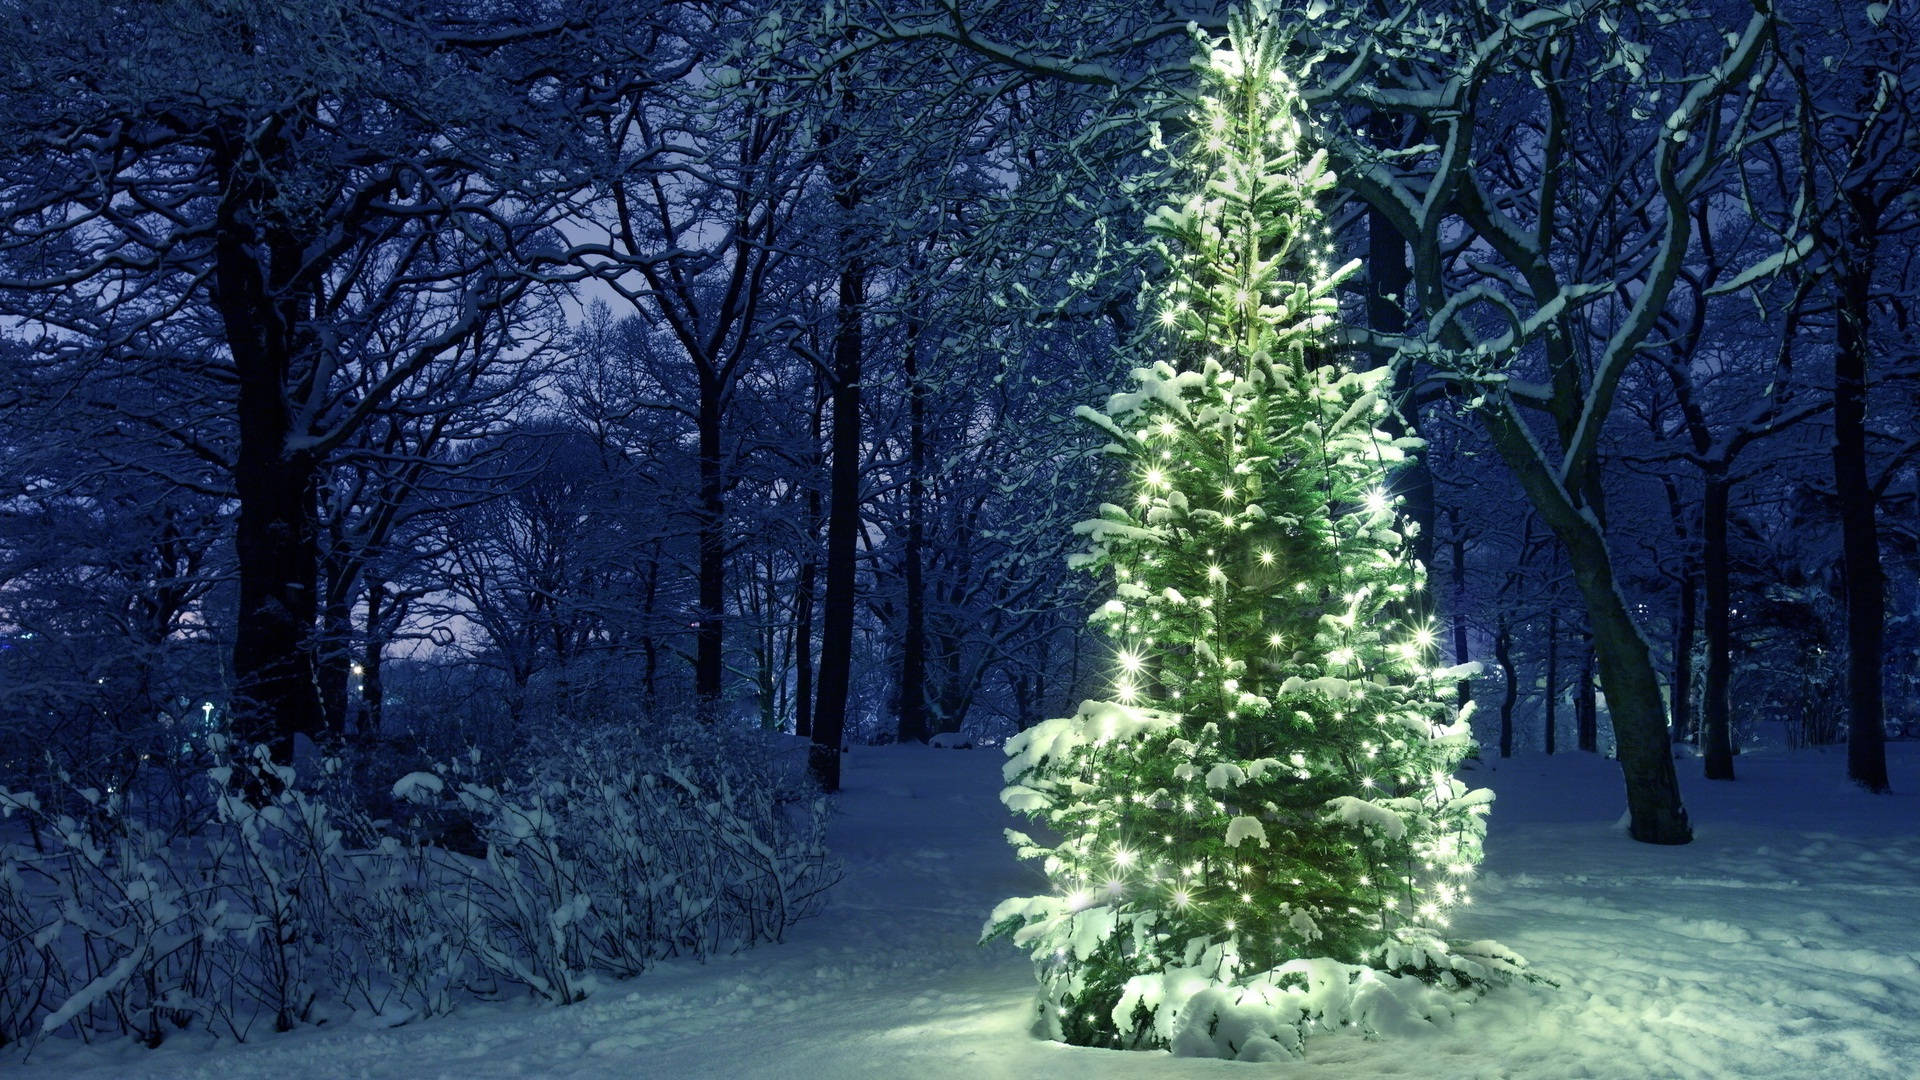 A beautiful winter wonderland in the steps of the Christmas Forest. Wallpaper